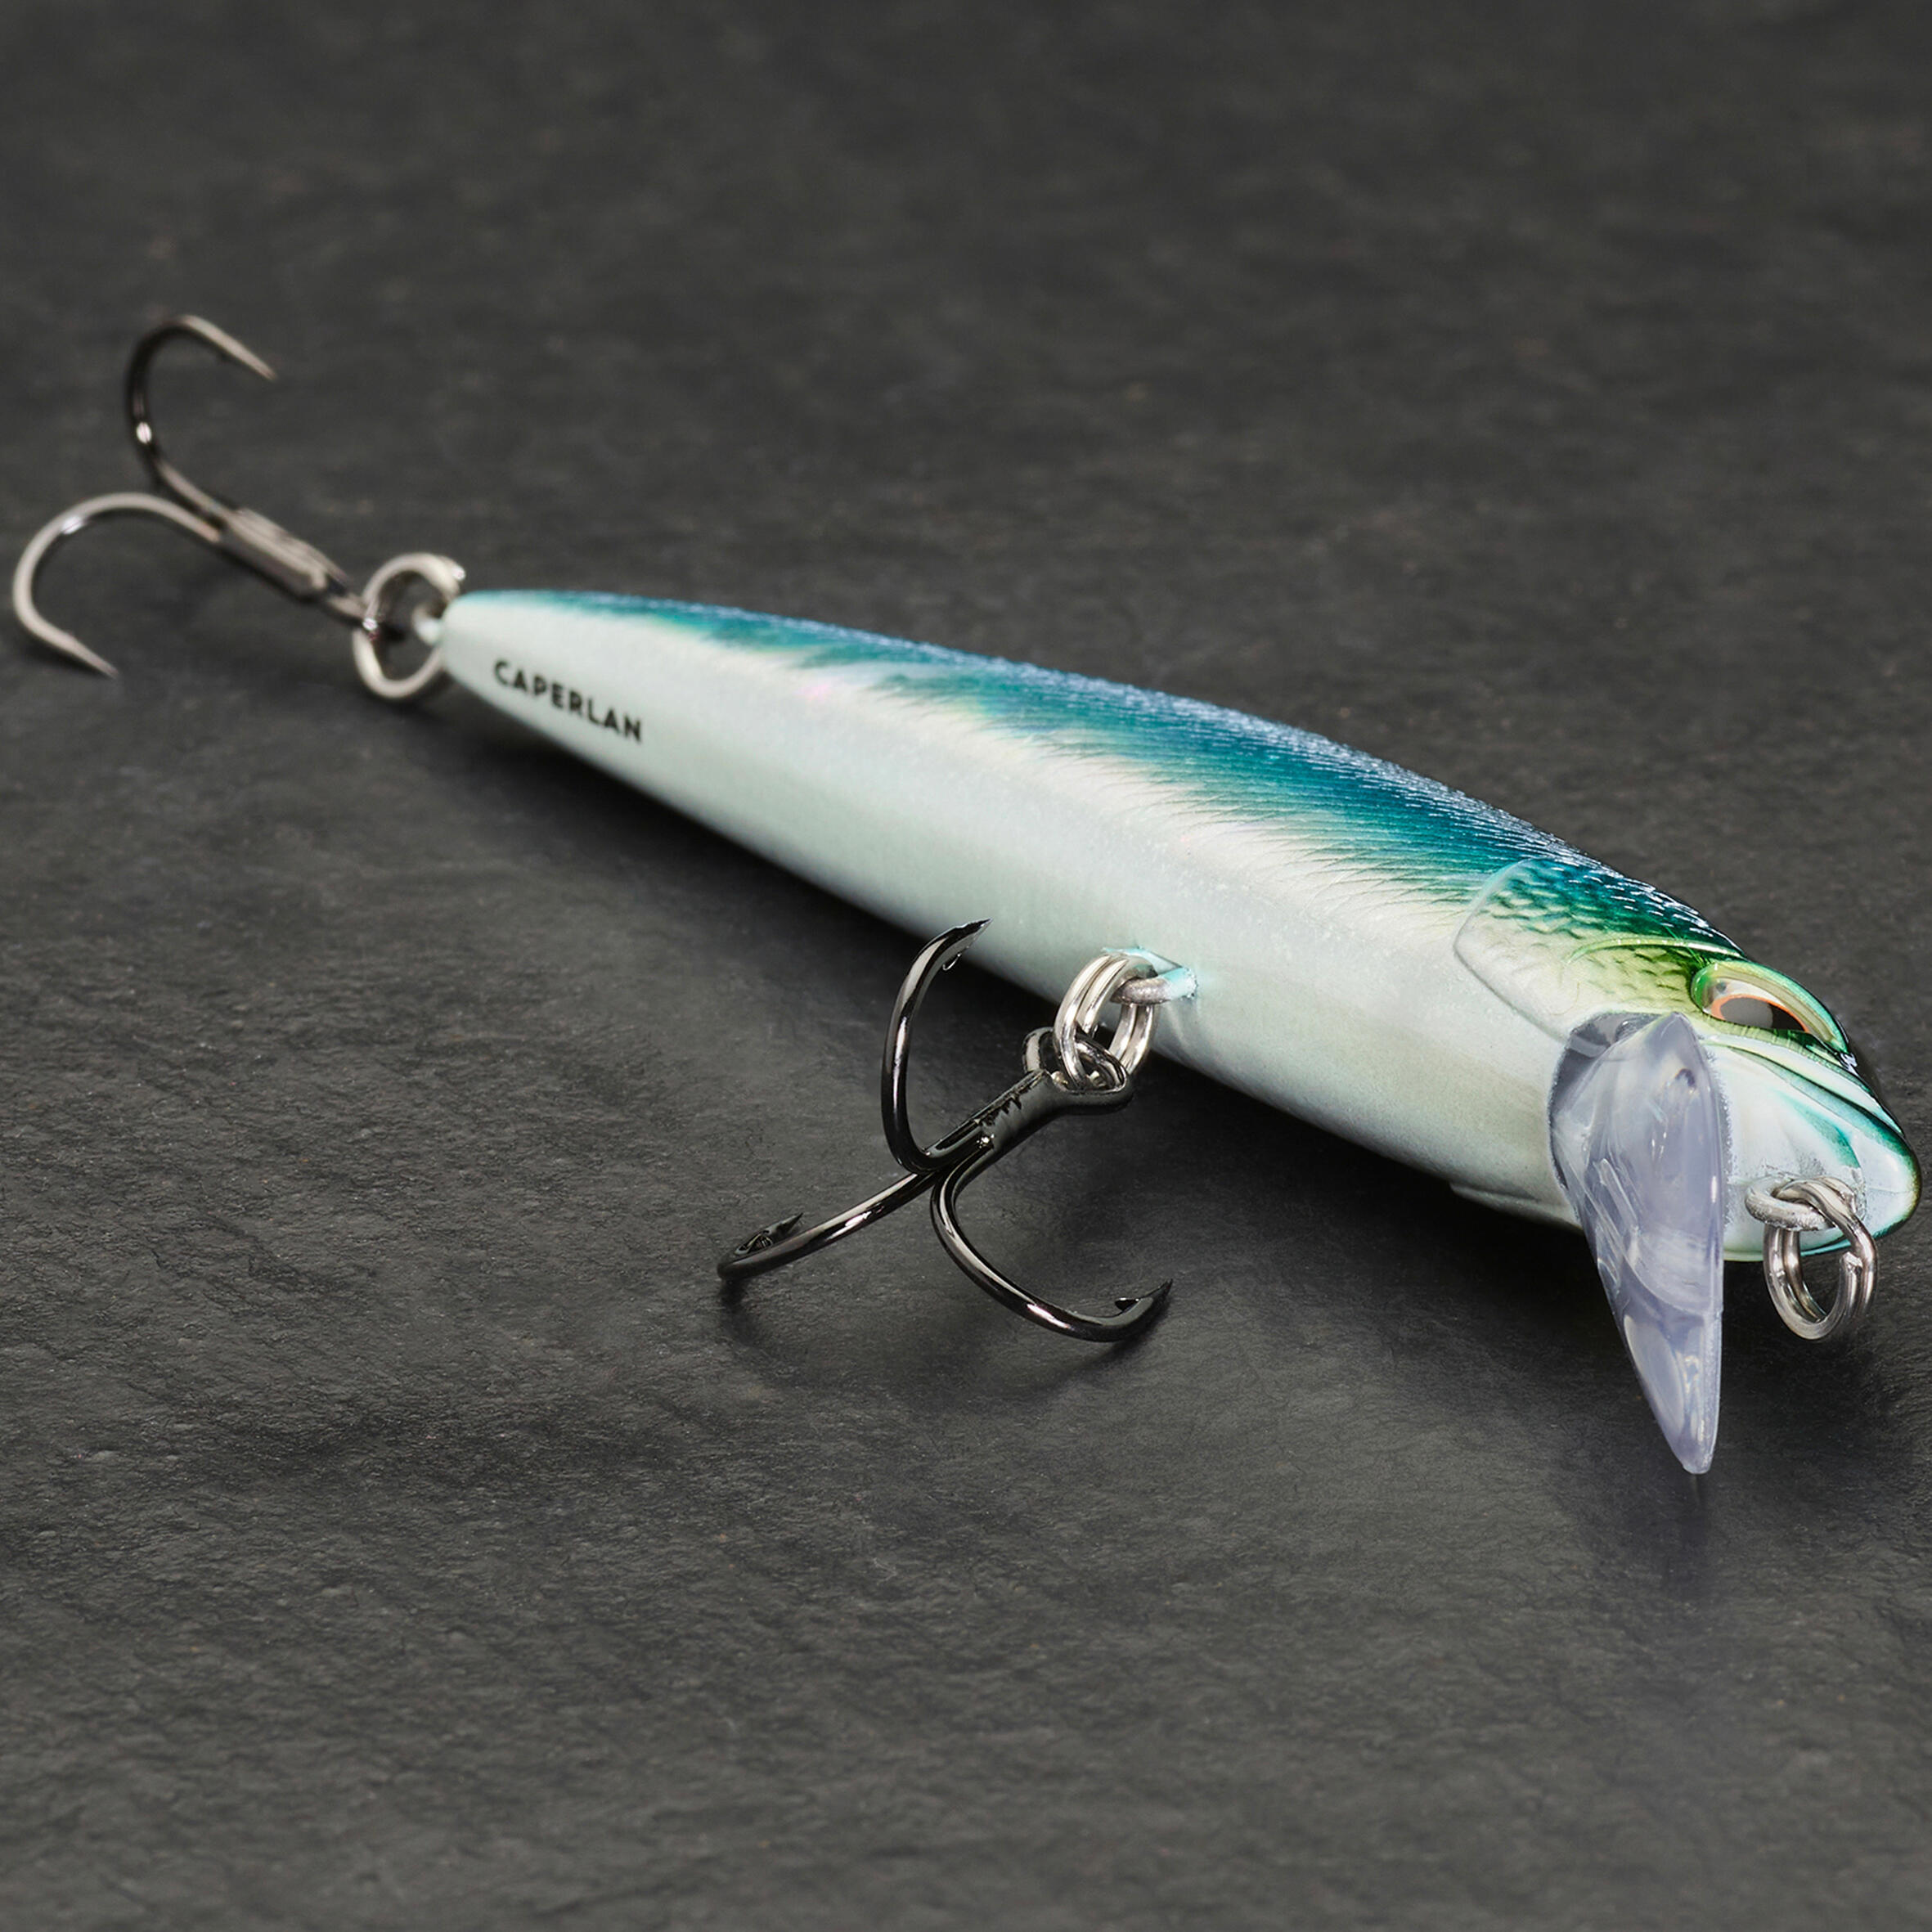 MINNOW HARD LURE FOR TROUT WXM MNWFS 85 US - BLUE BACK 3/4